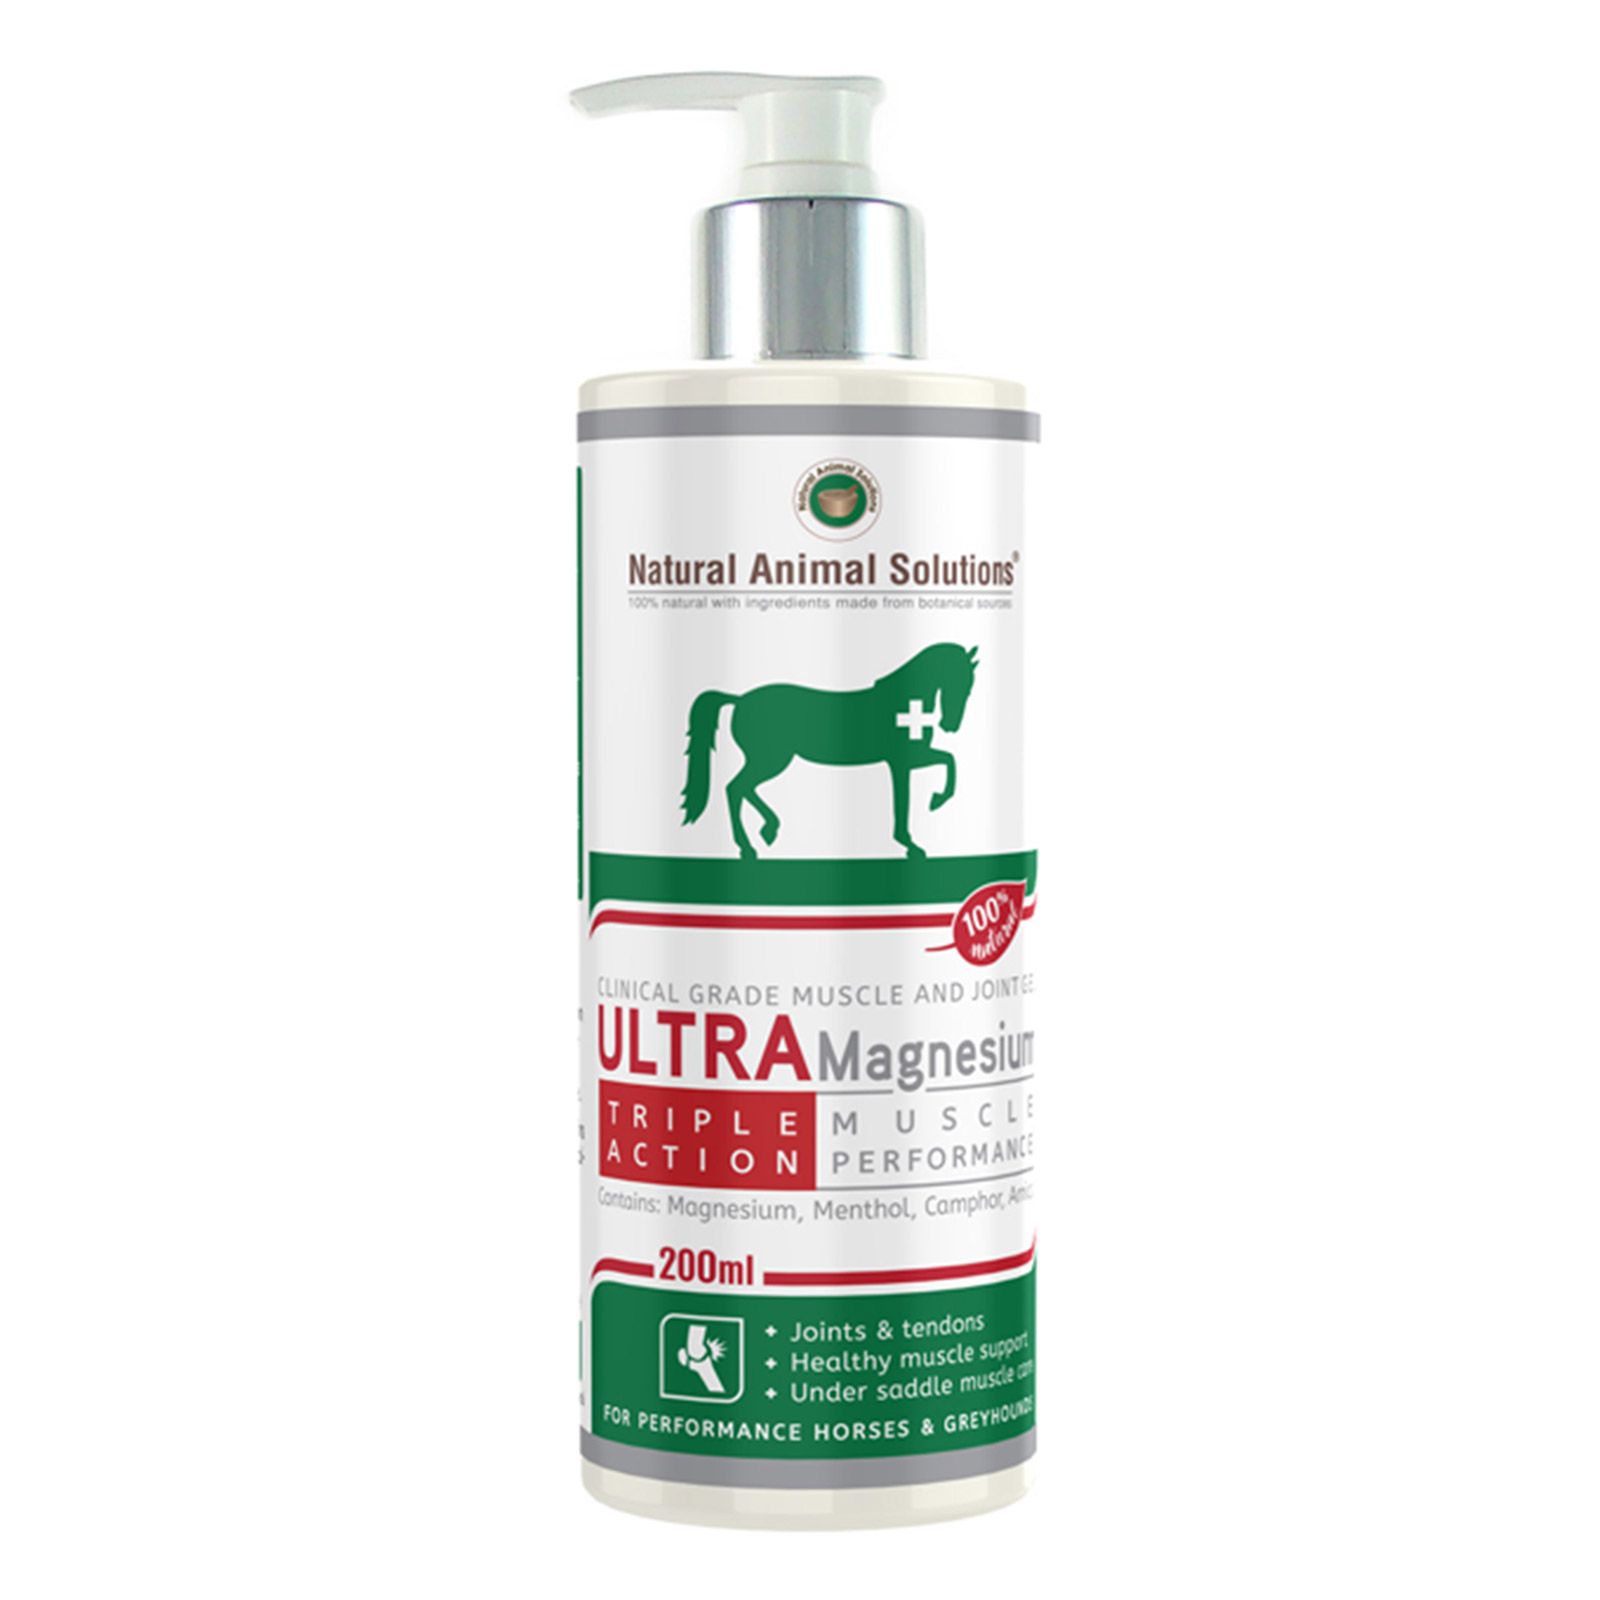 Natural Animal Solutions (NAS) Ultra Magnesium Muscle And Joint Care Gel for Dogs